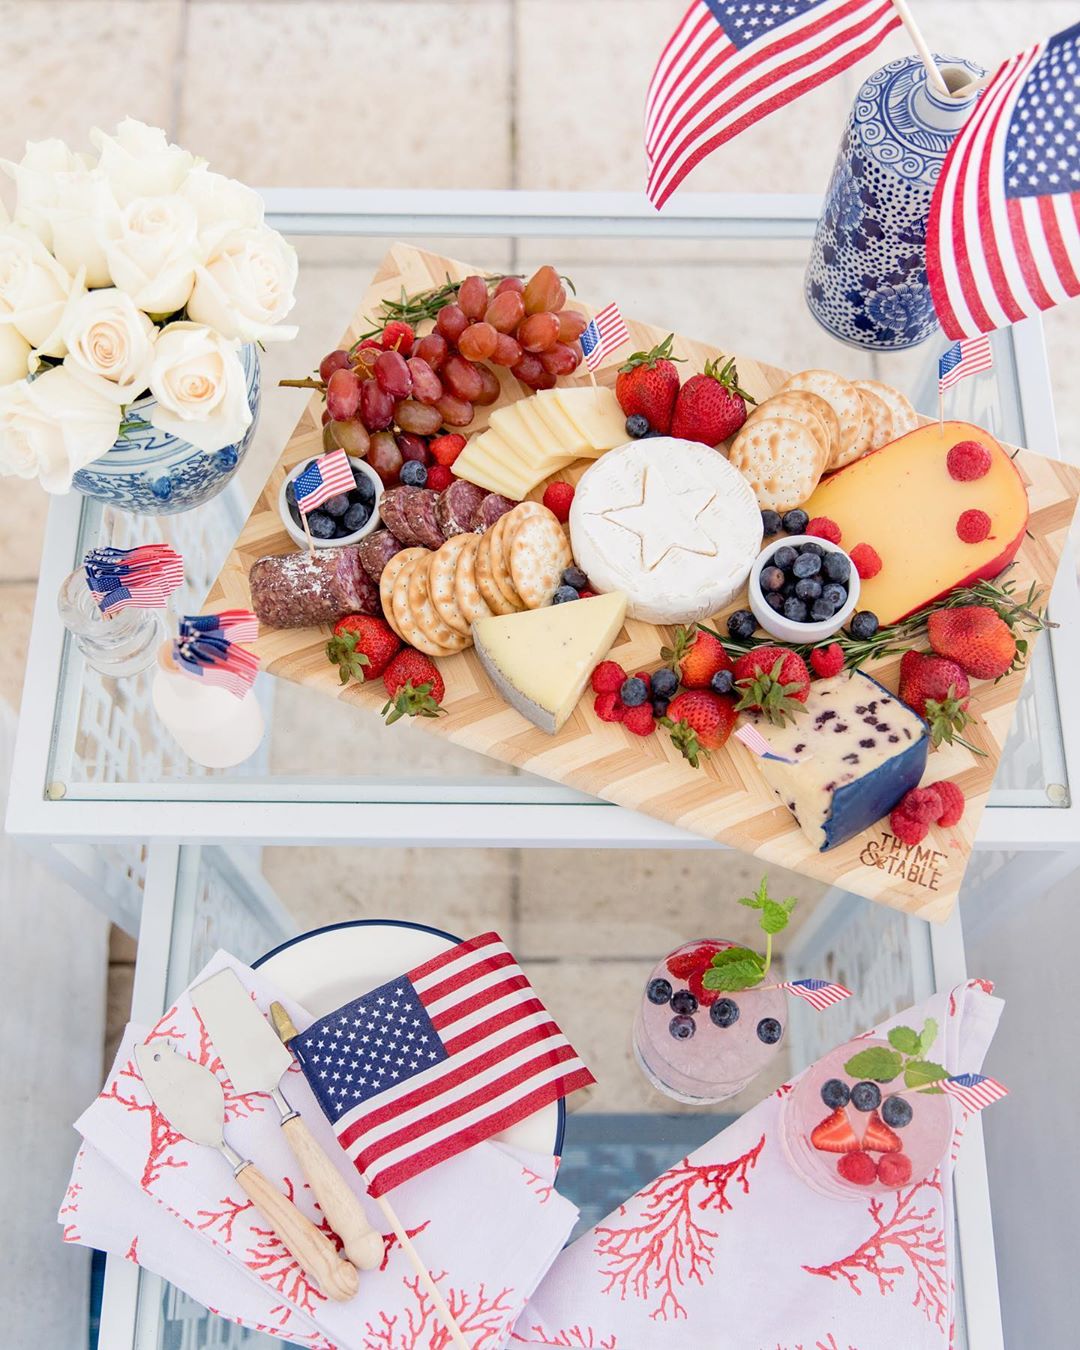 Charcuterie Board Set Up for Fourth of July Party. Photo by Instagram user @fashionablehostess